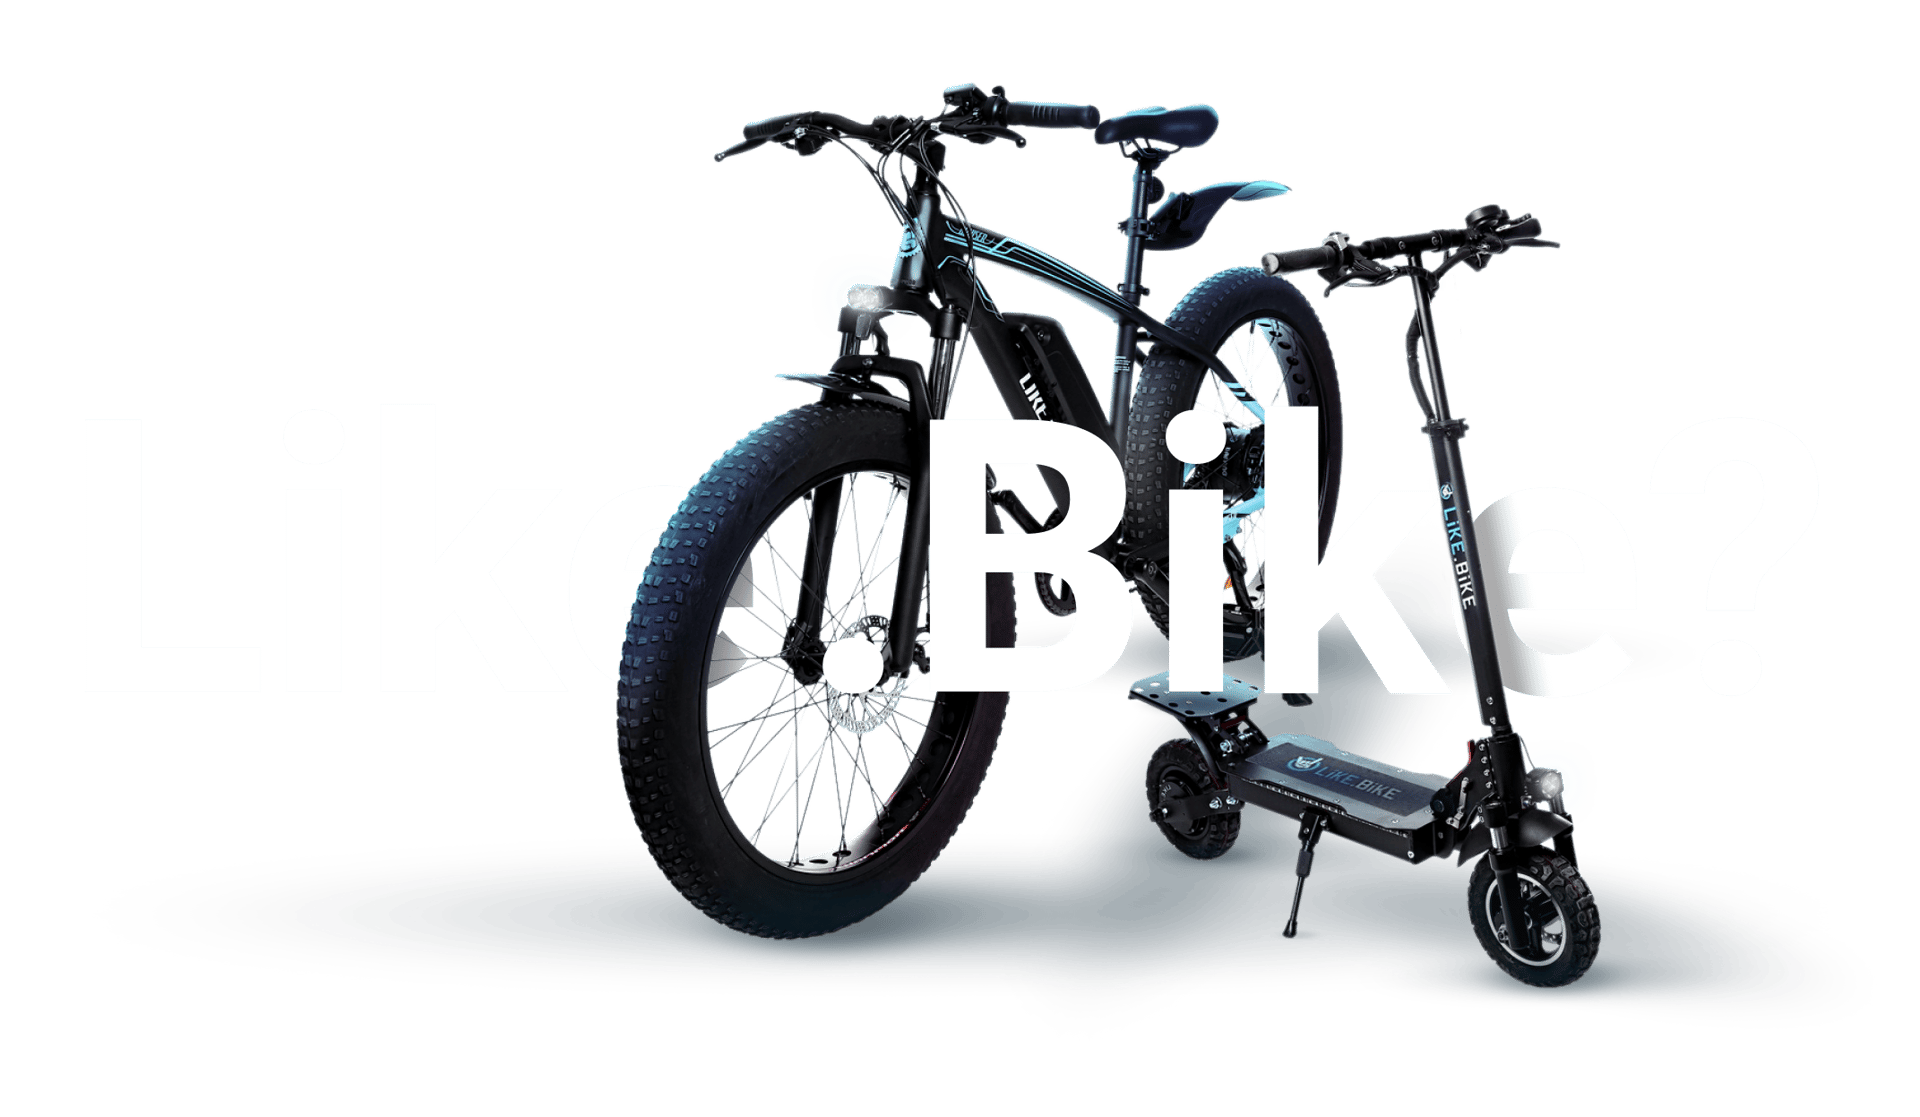 Bicycles--Equipment and supplies, Bicycle wheel, Tire, Crankset